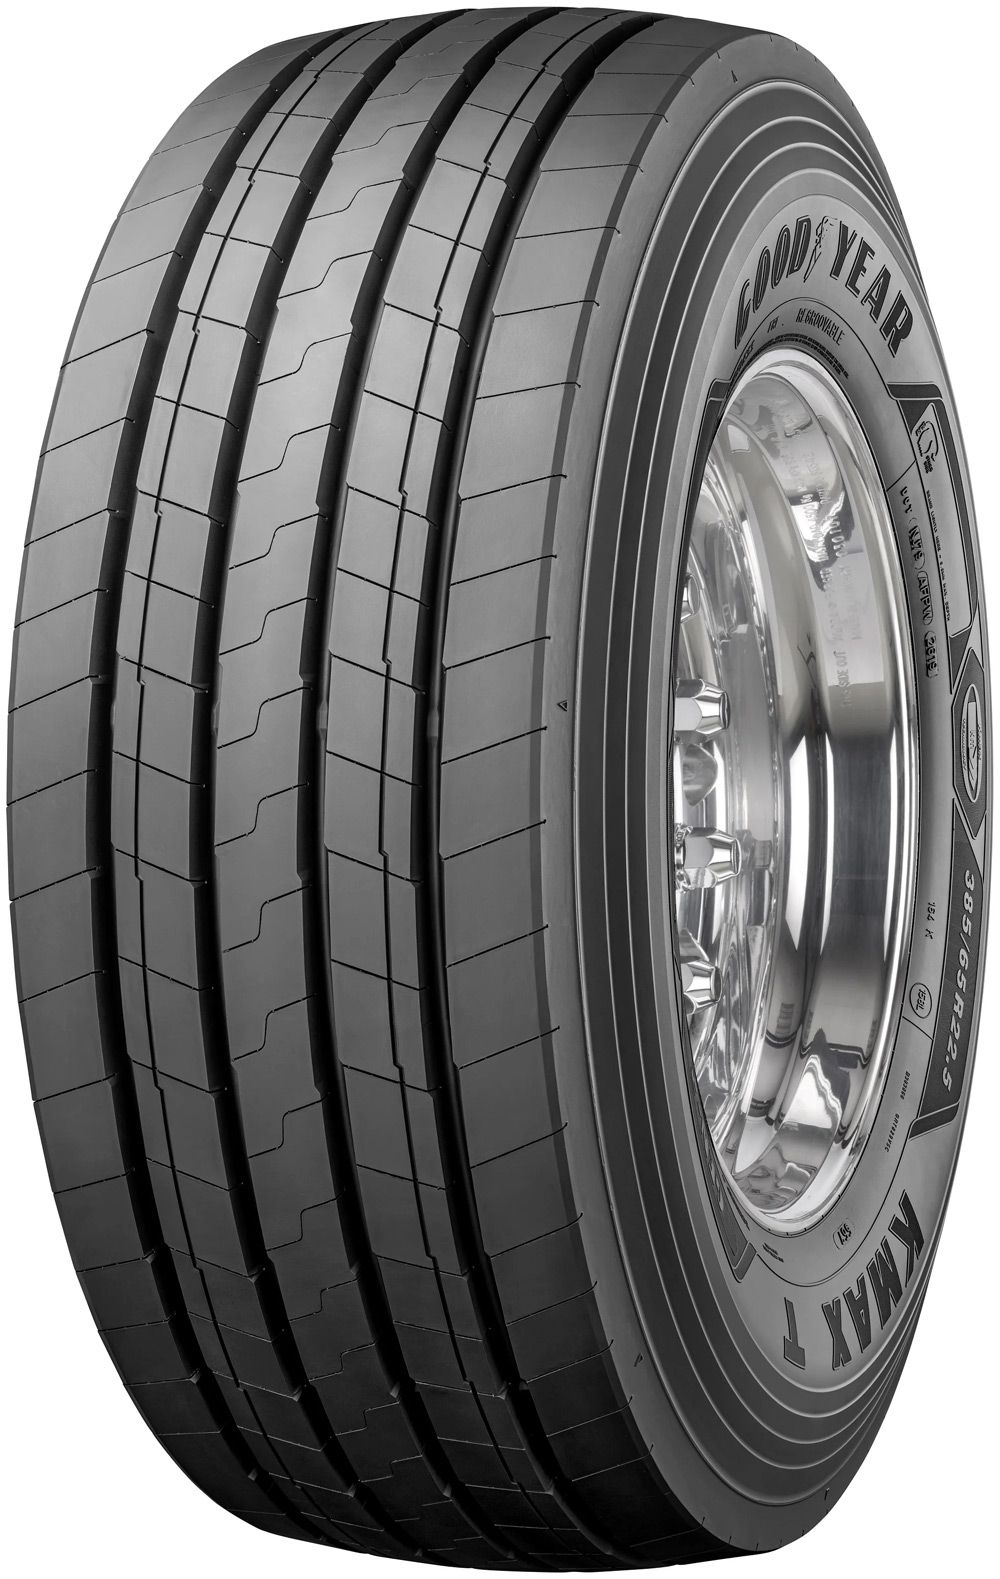 product_type-heavy_tires GOODYEAR KMAX T G2 3PMSF 385/65 R22.5 164K